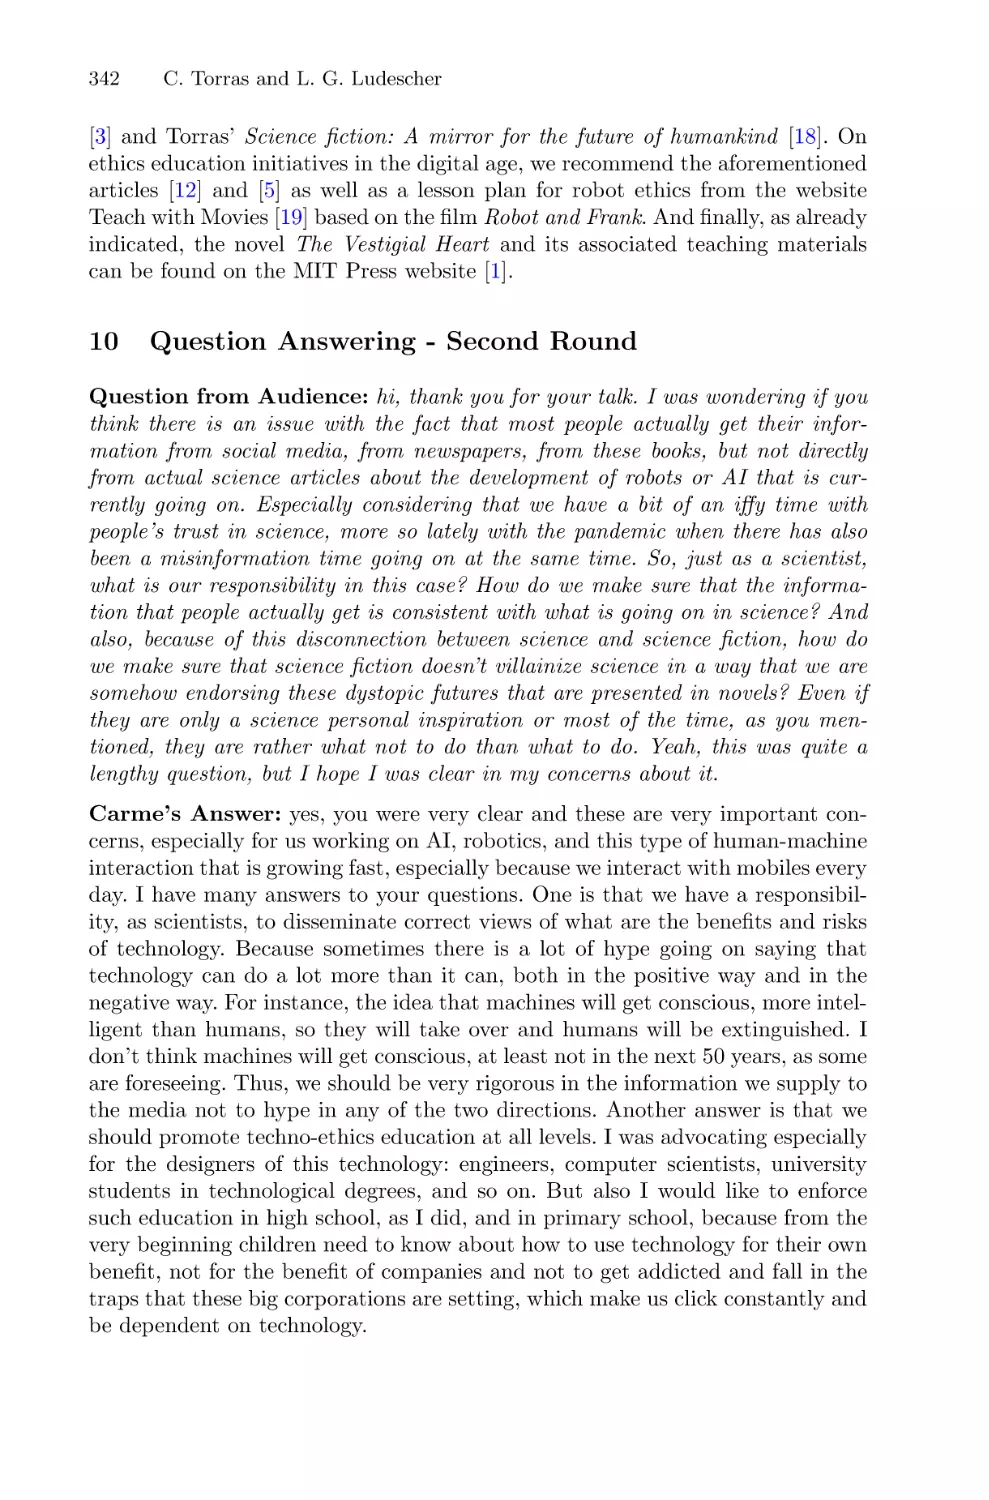 10 Question Answering - Second Round